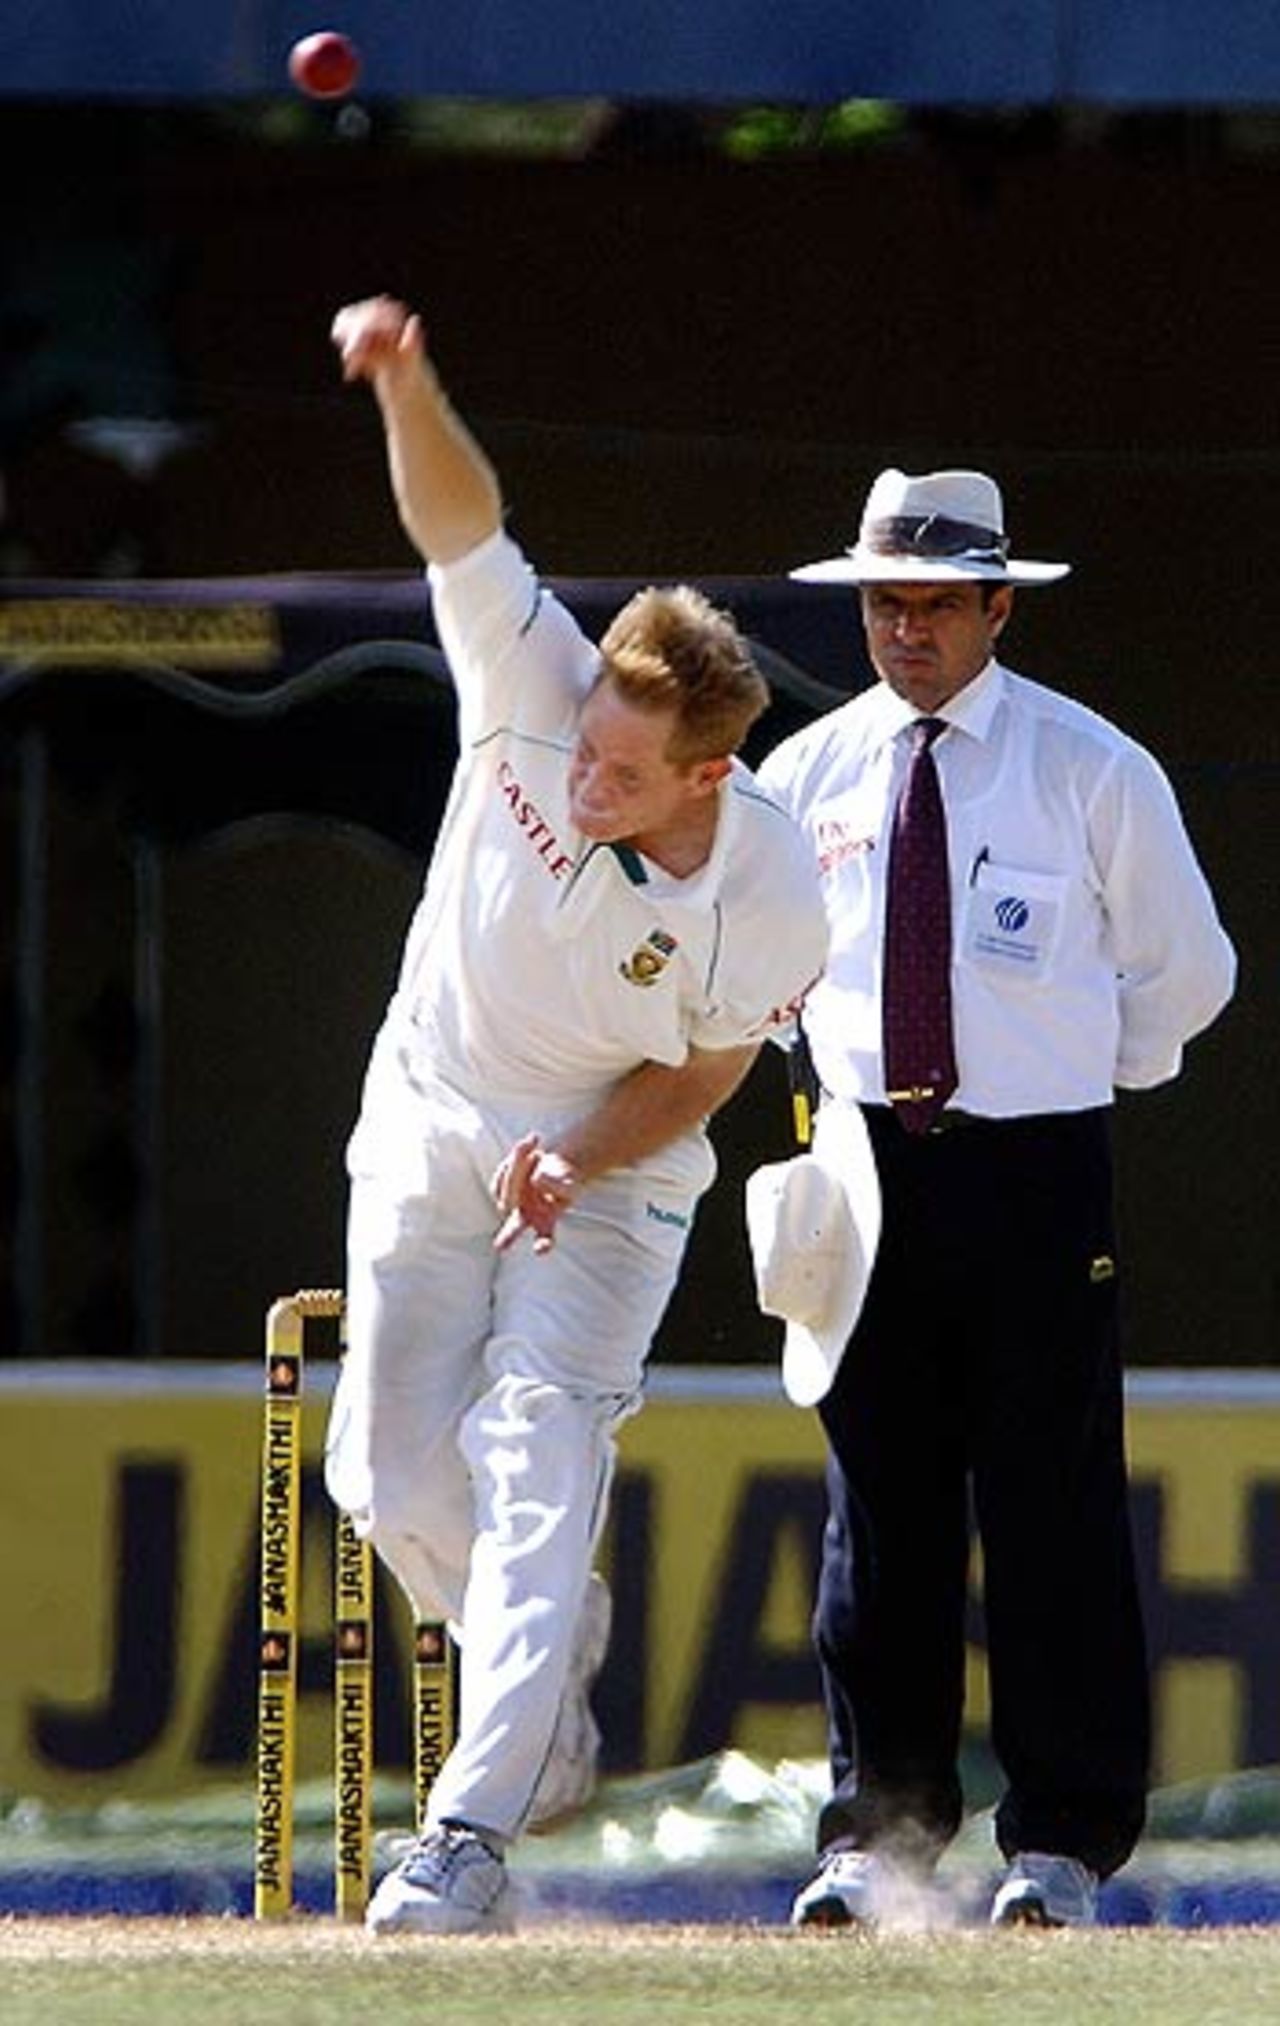 Shaun Pollock tries his hand at offbreaks, Sri Lanka v South Africa, 2nd Test, Colombo, 4th day, August 7, 2006